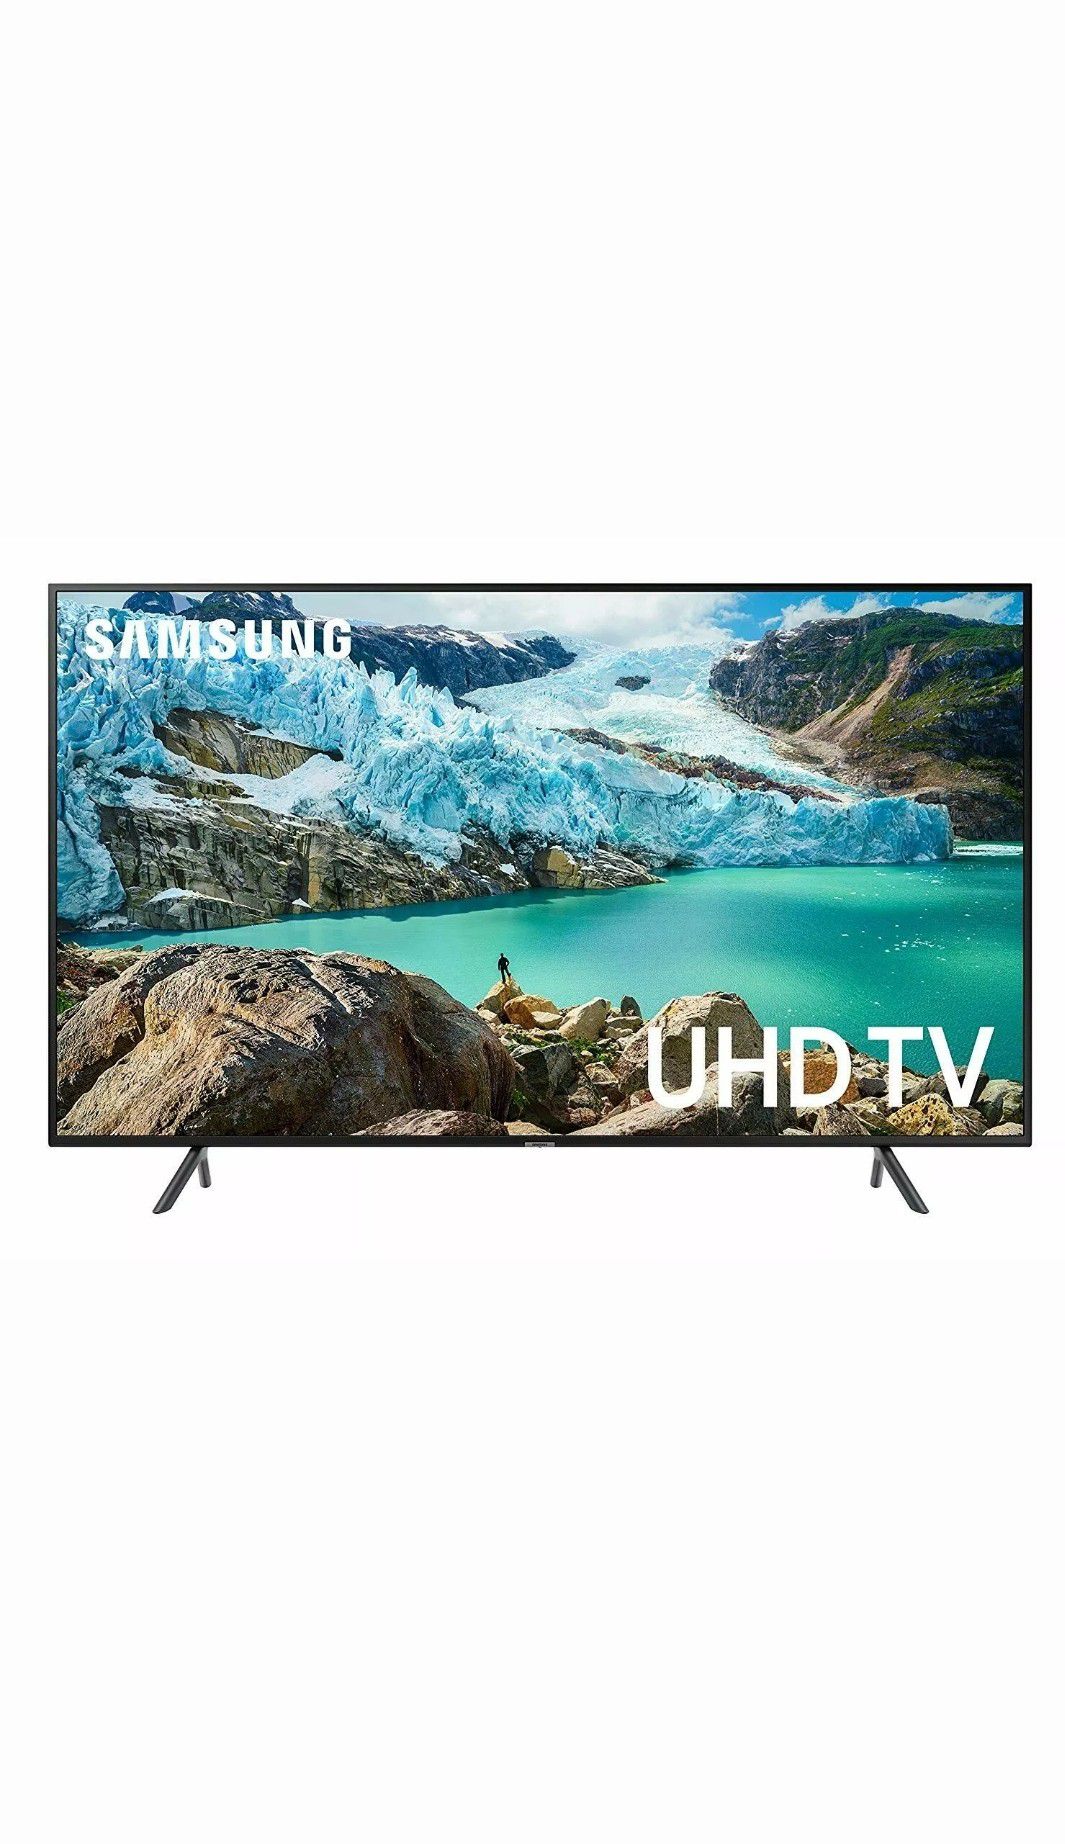 Samsung UN55RU7100 55" PurColor Smart 4K Ultra HD LED TV with 120 Motion Rate